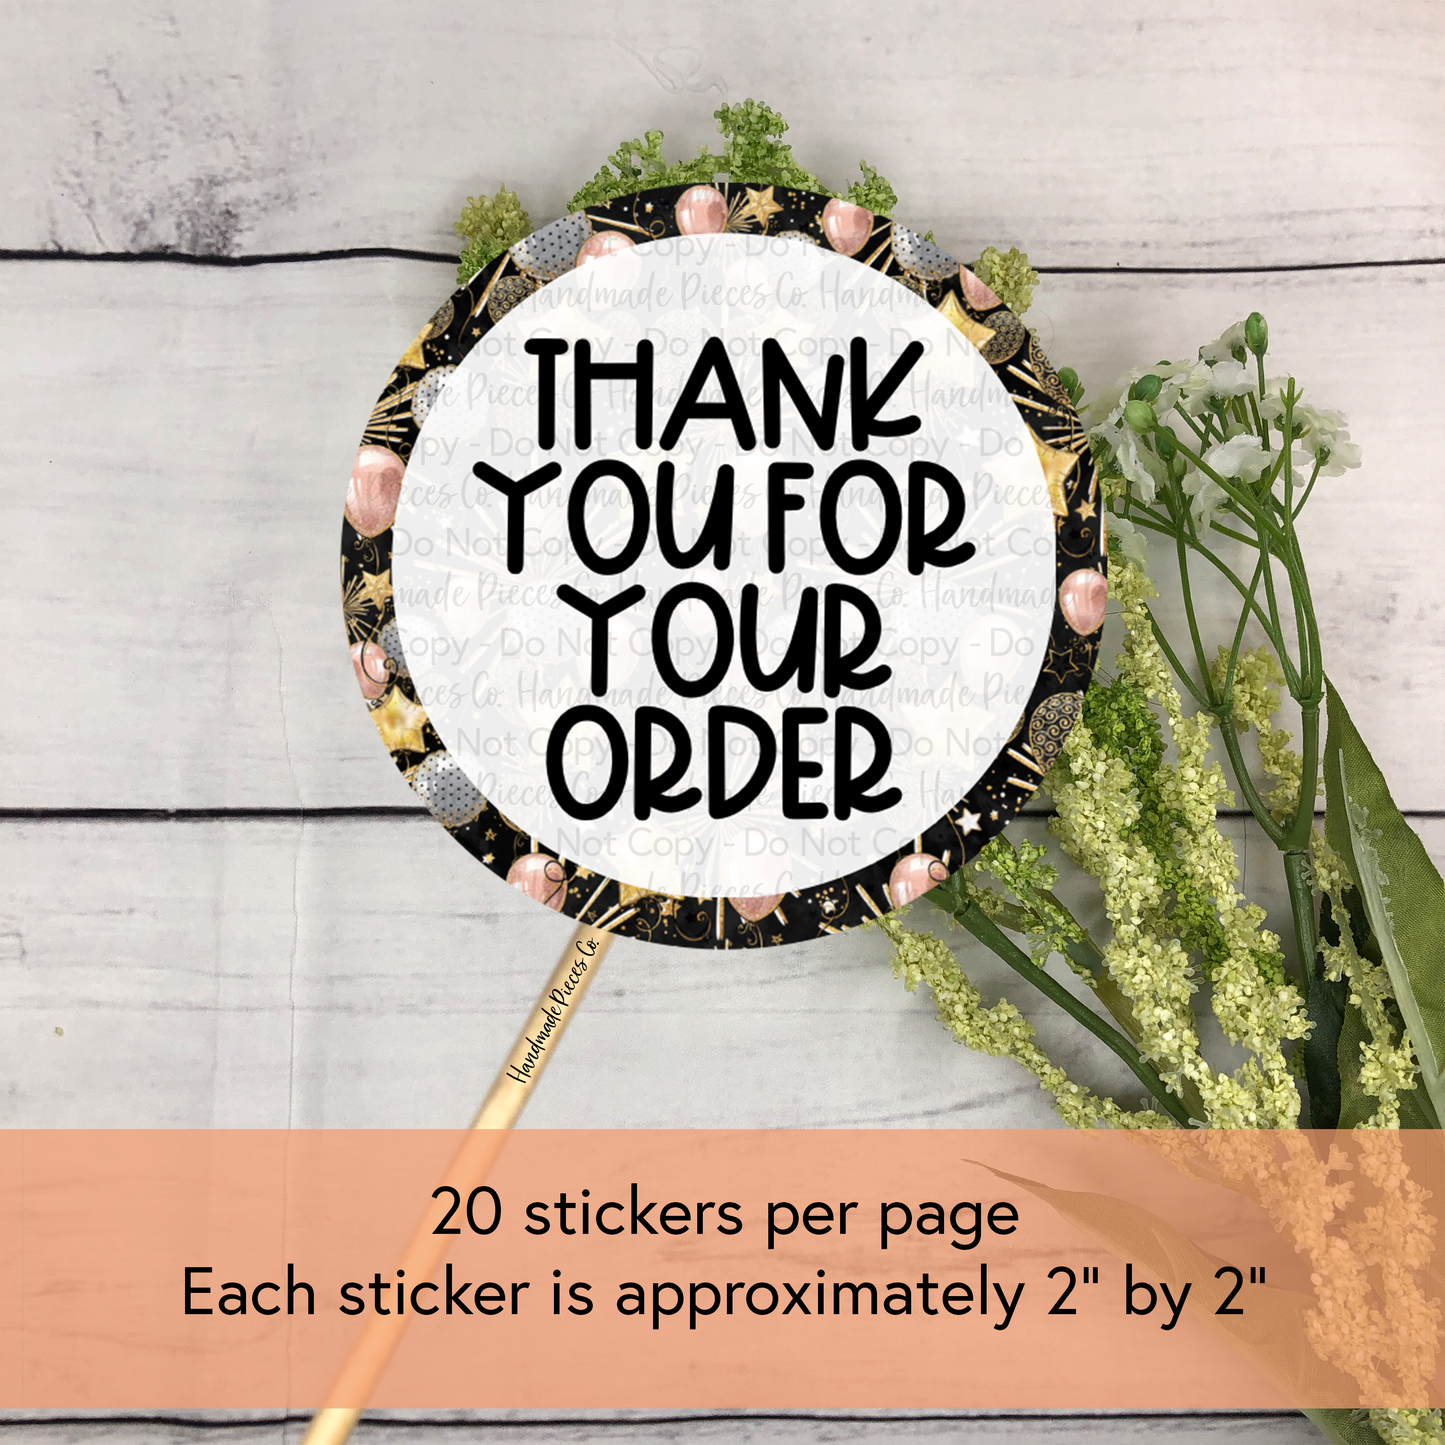 Thank You for Your Order - Packaging Sticker, New Years Theme 2022